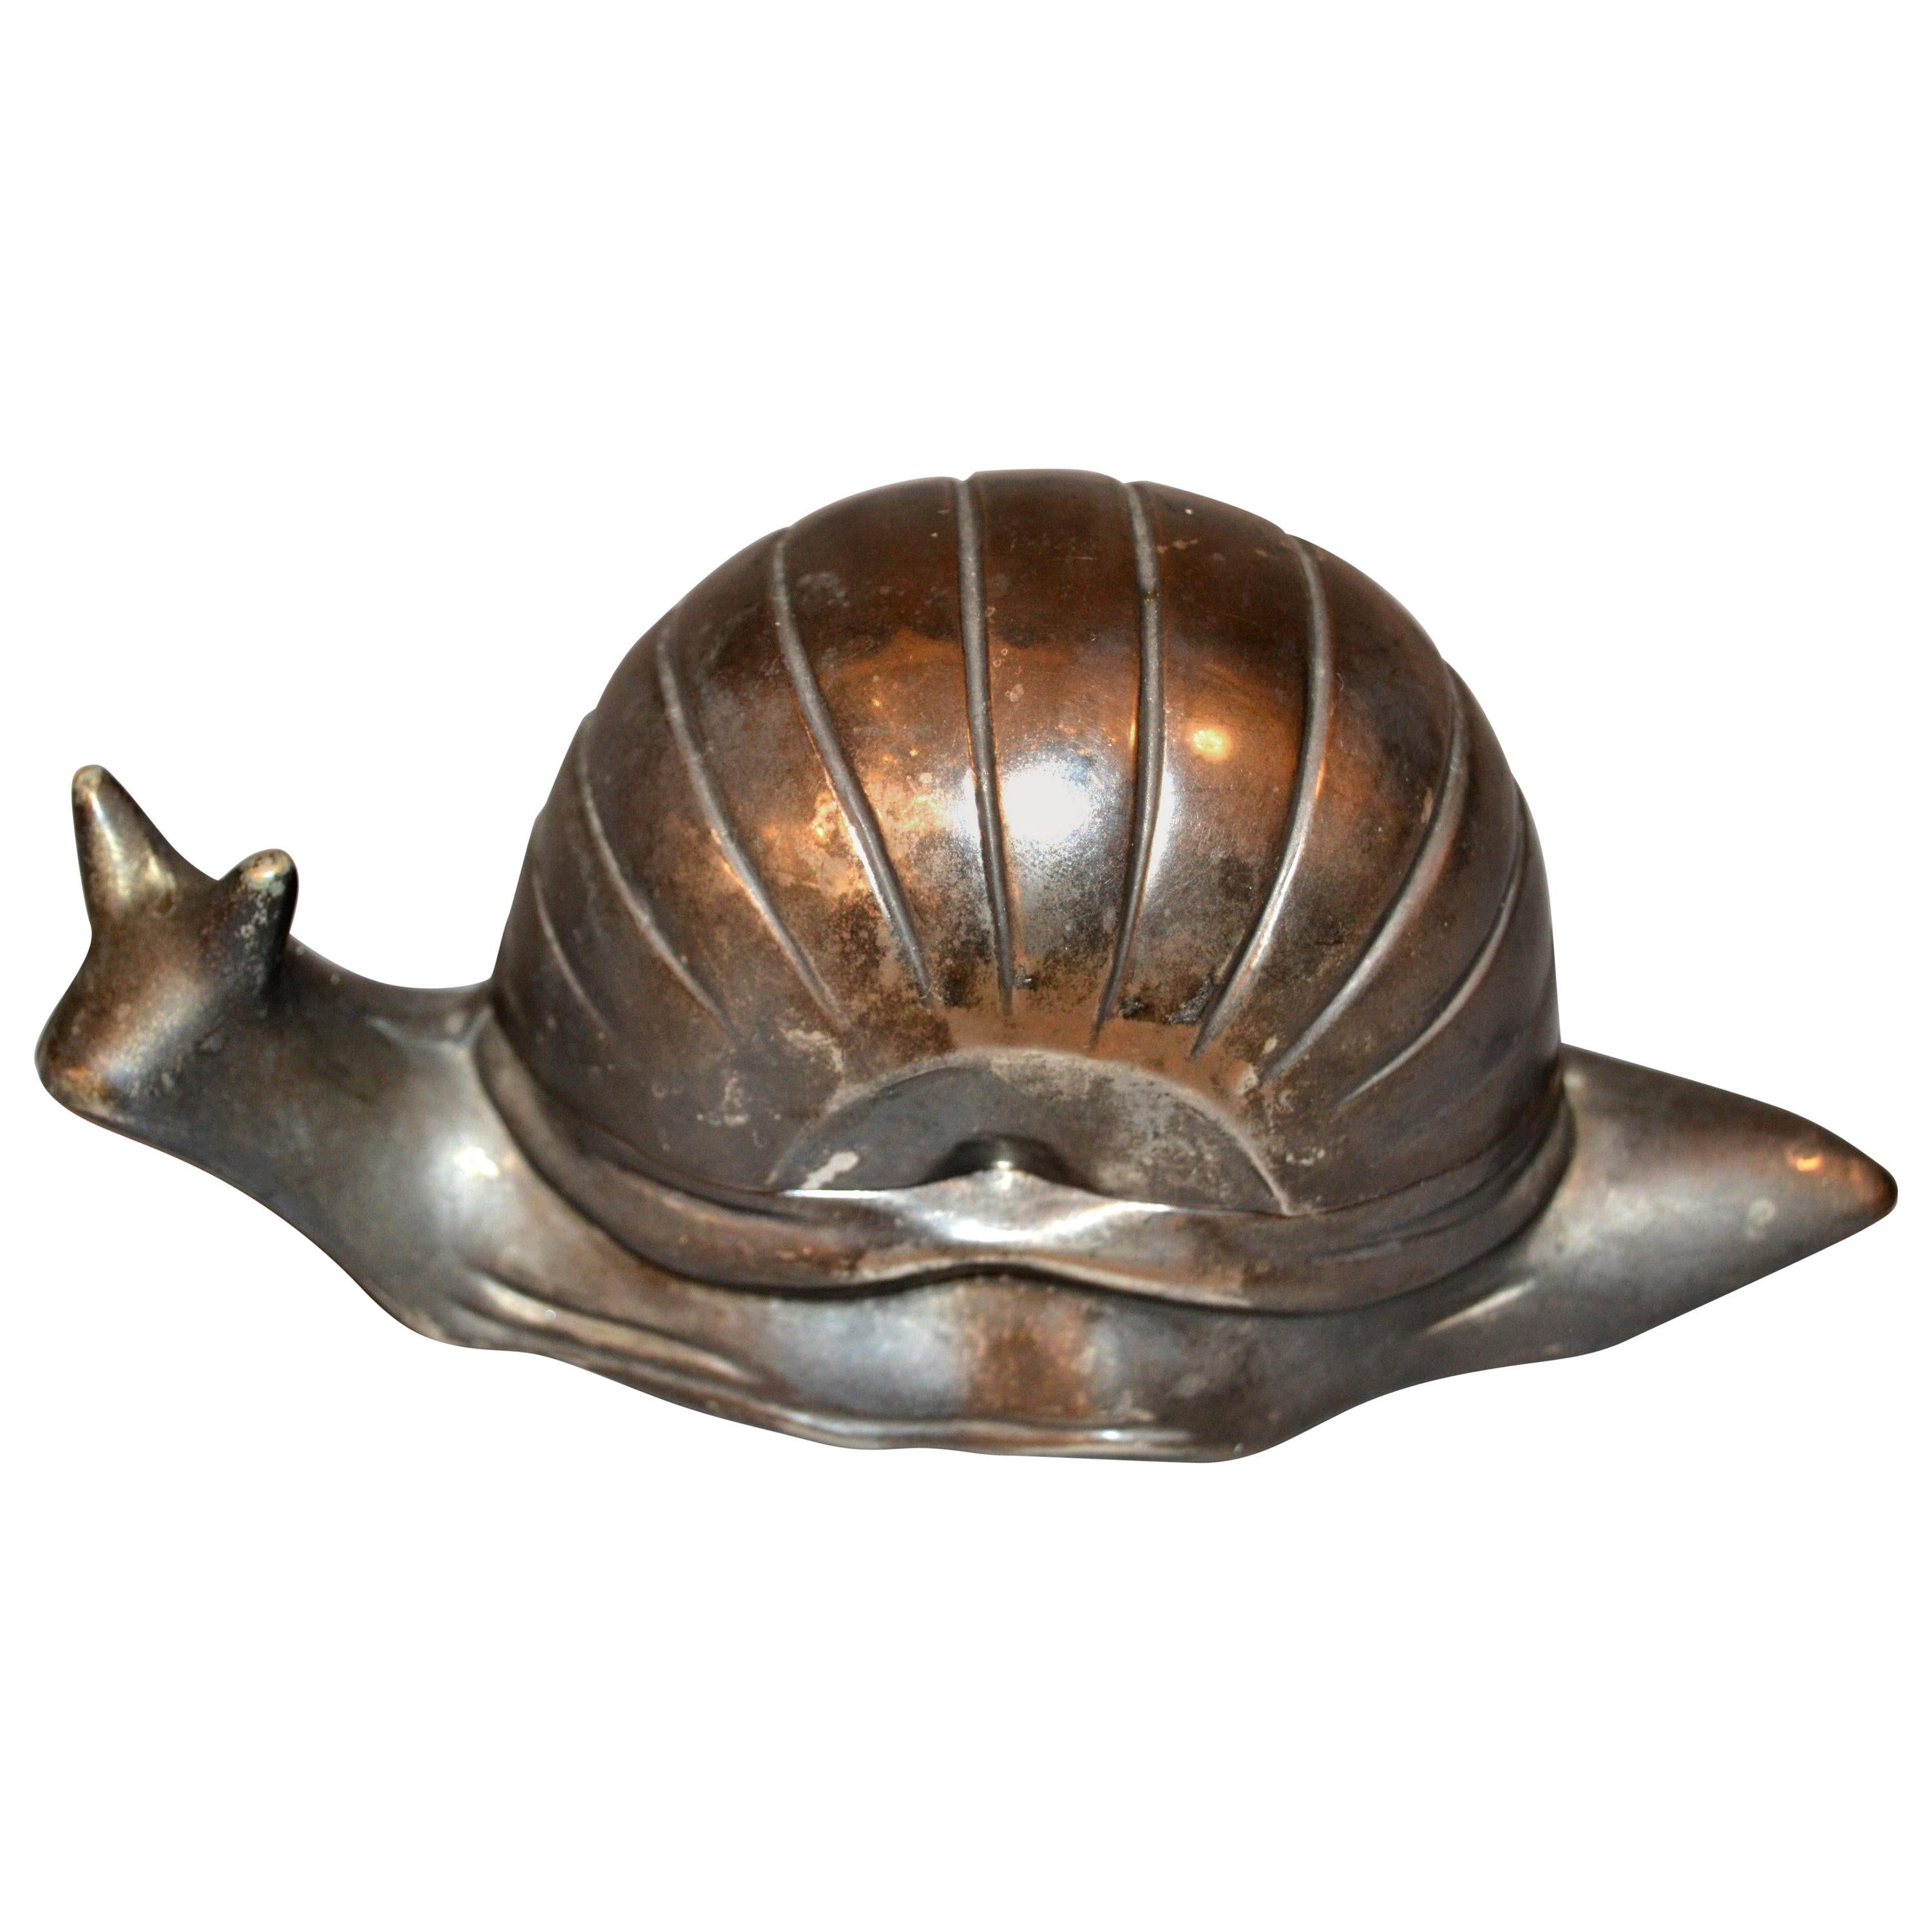 Vintage Silver Plate Snail Salt Dish Spice Dish with Glass Inlay For Sale